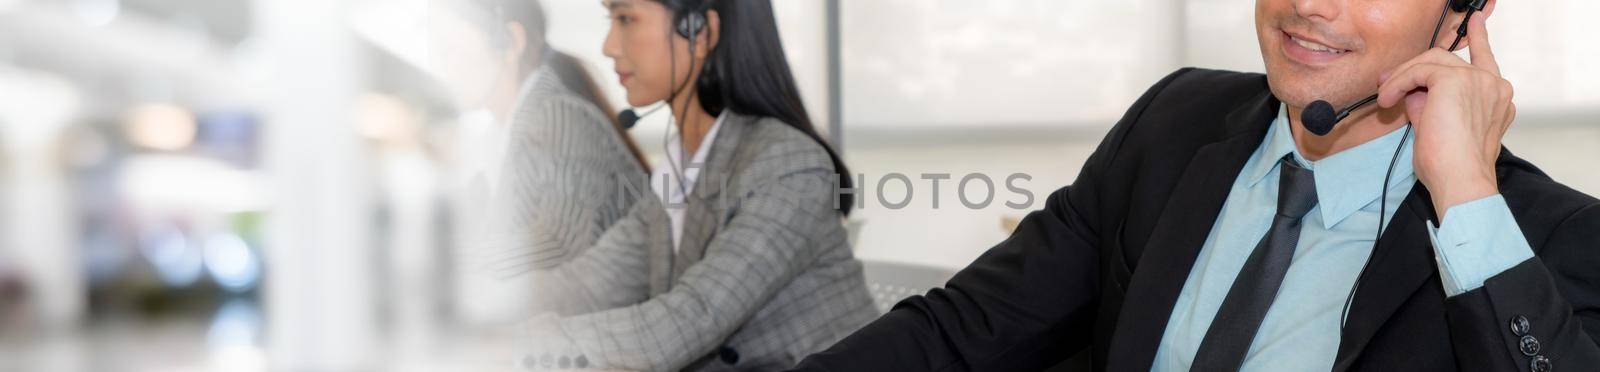 Call center or customer support agent in broaden view panoramic banner wearing headset while working at office to support remote customer or colleague on telephone video conference call